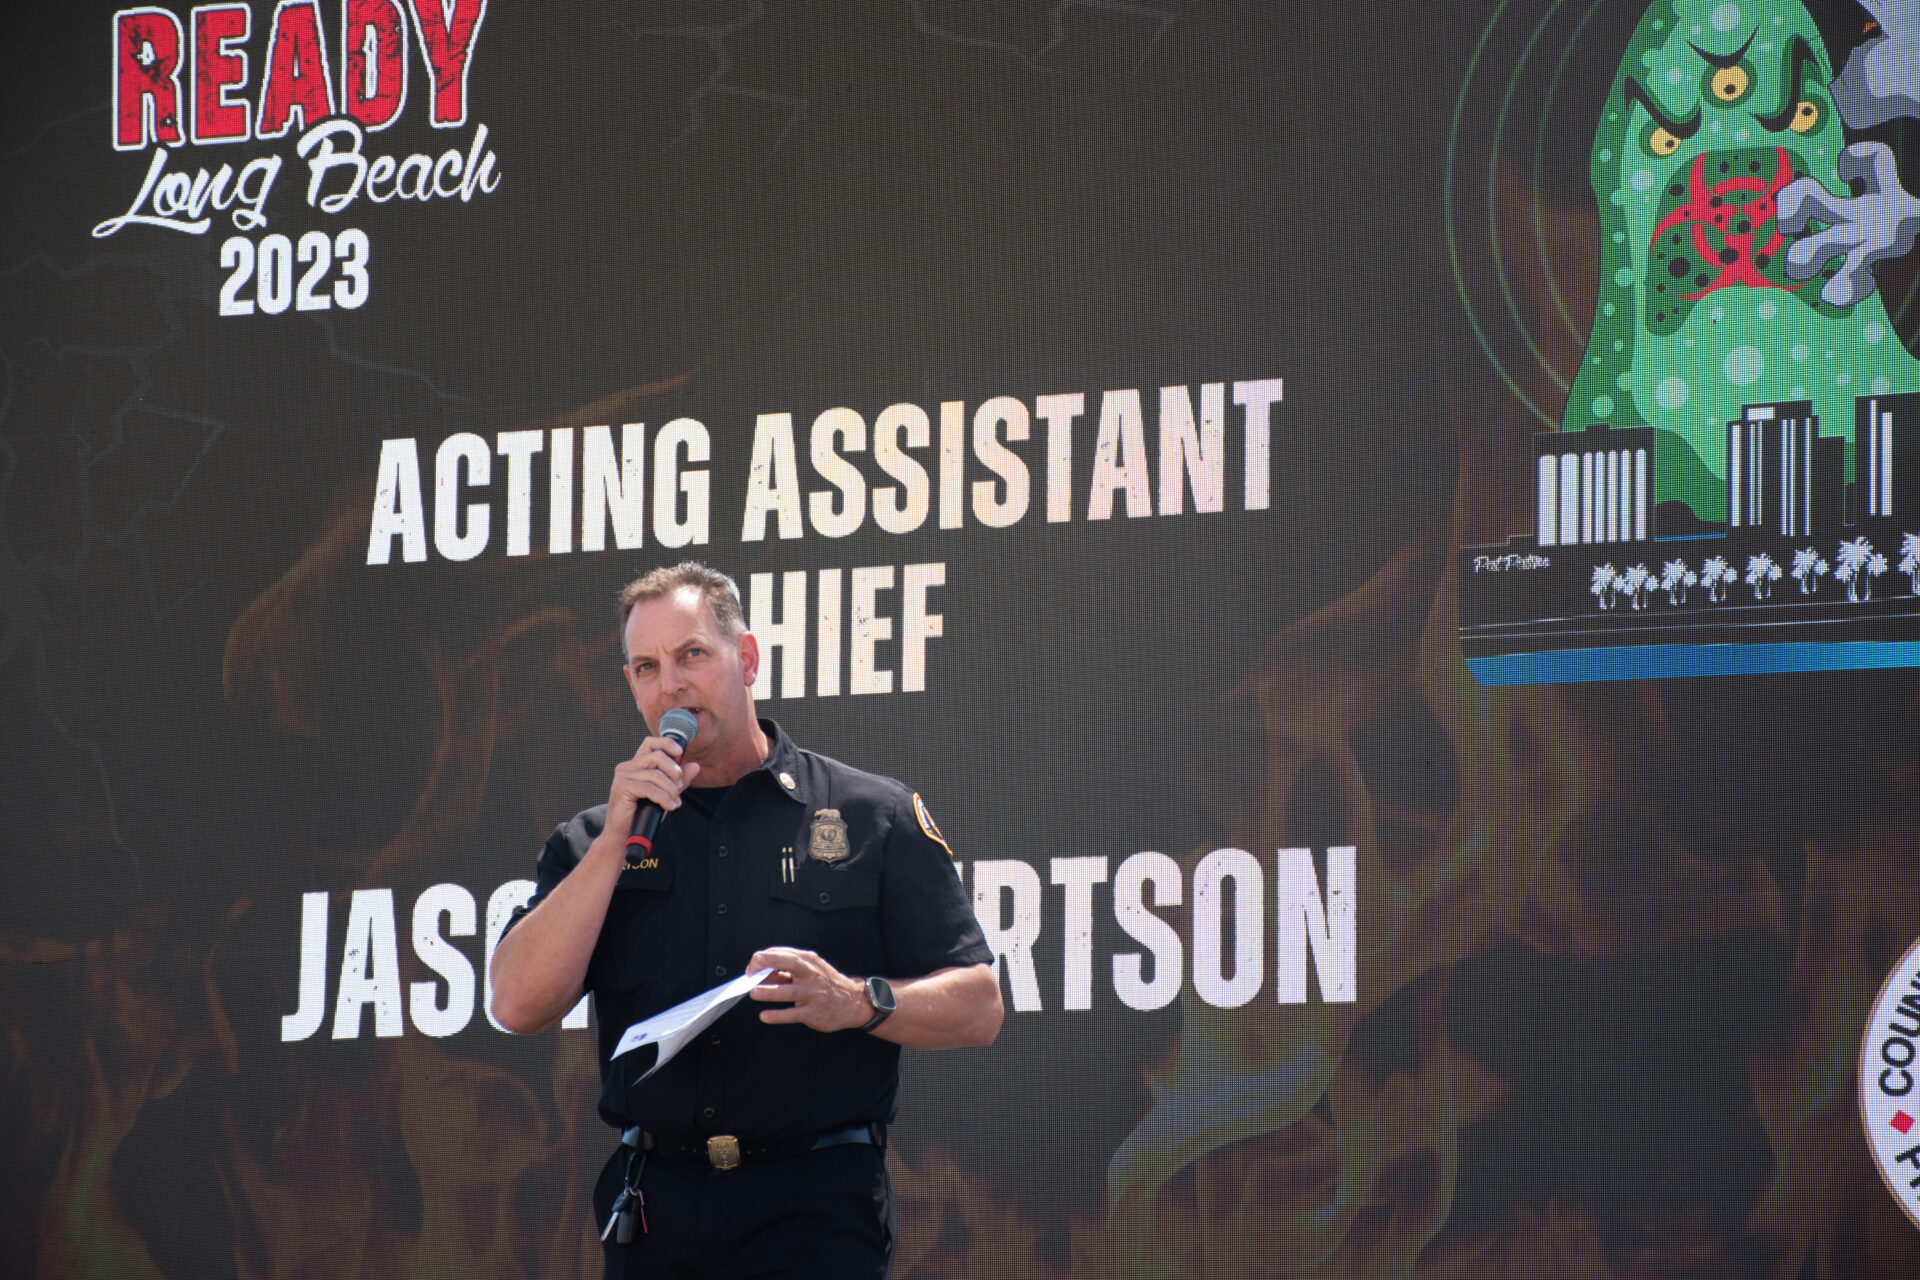 The County of Los Angeles Fire Department (LACoFD) participated in the annual READY Long Beach, a Disaster Preparedness event, on Saturday, September 9, 2023, at California State University, Long Beach’s Walter Pyramid.